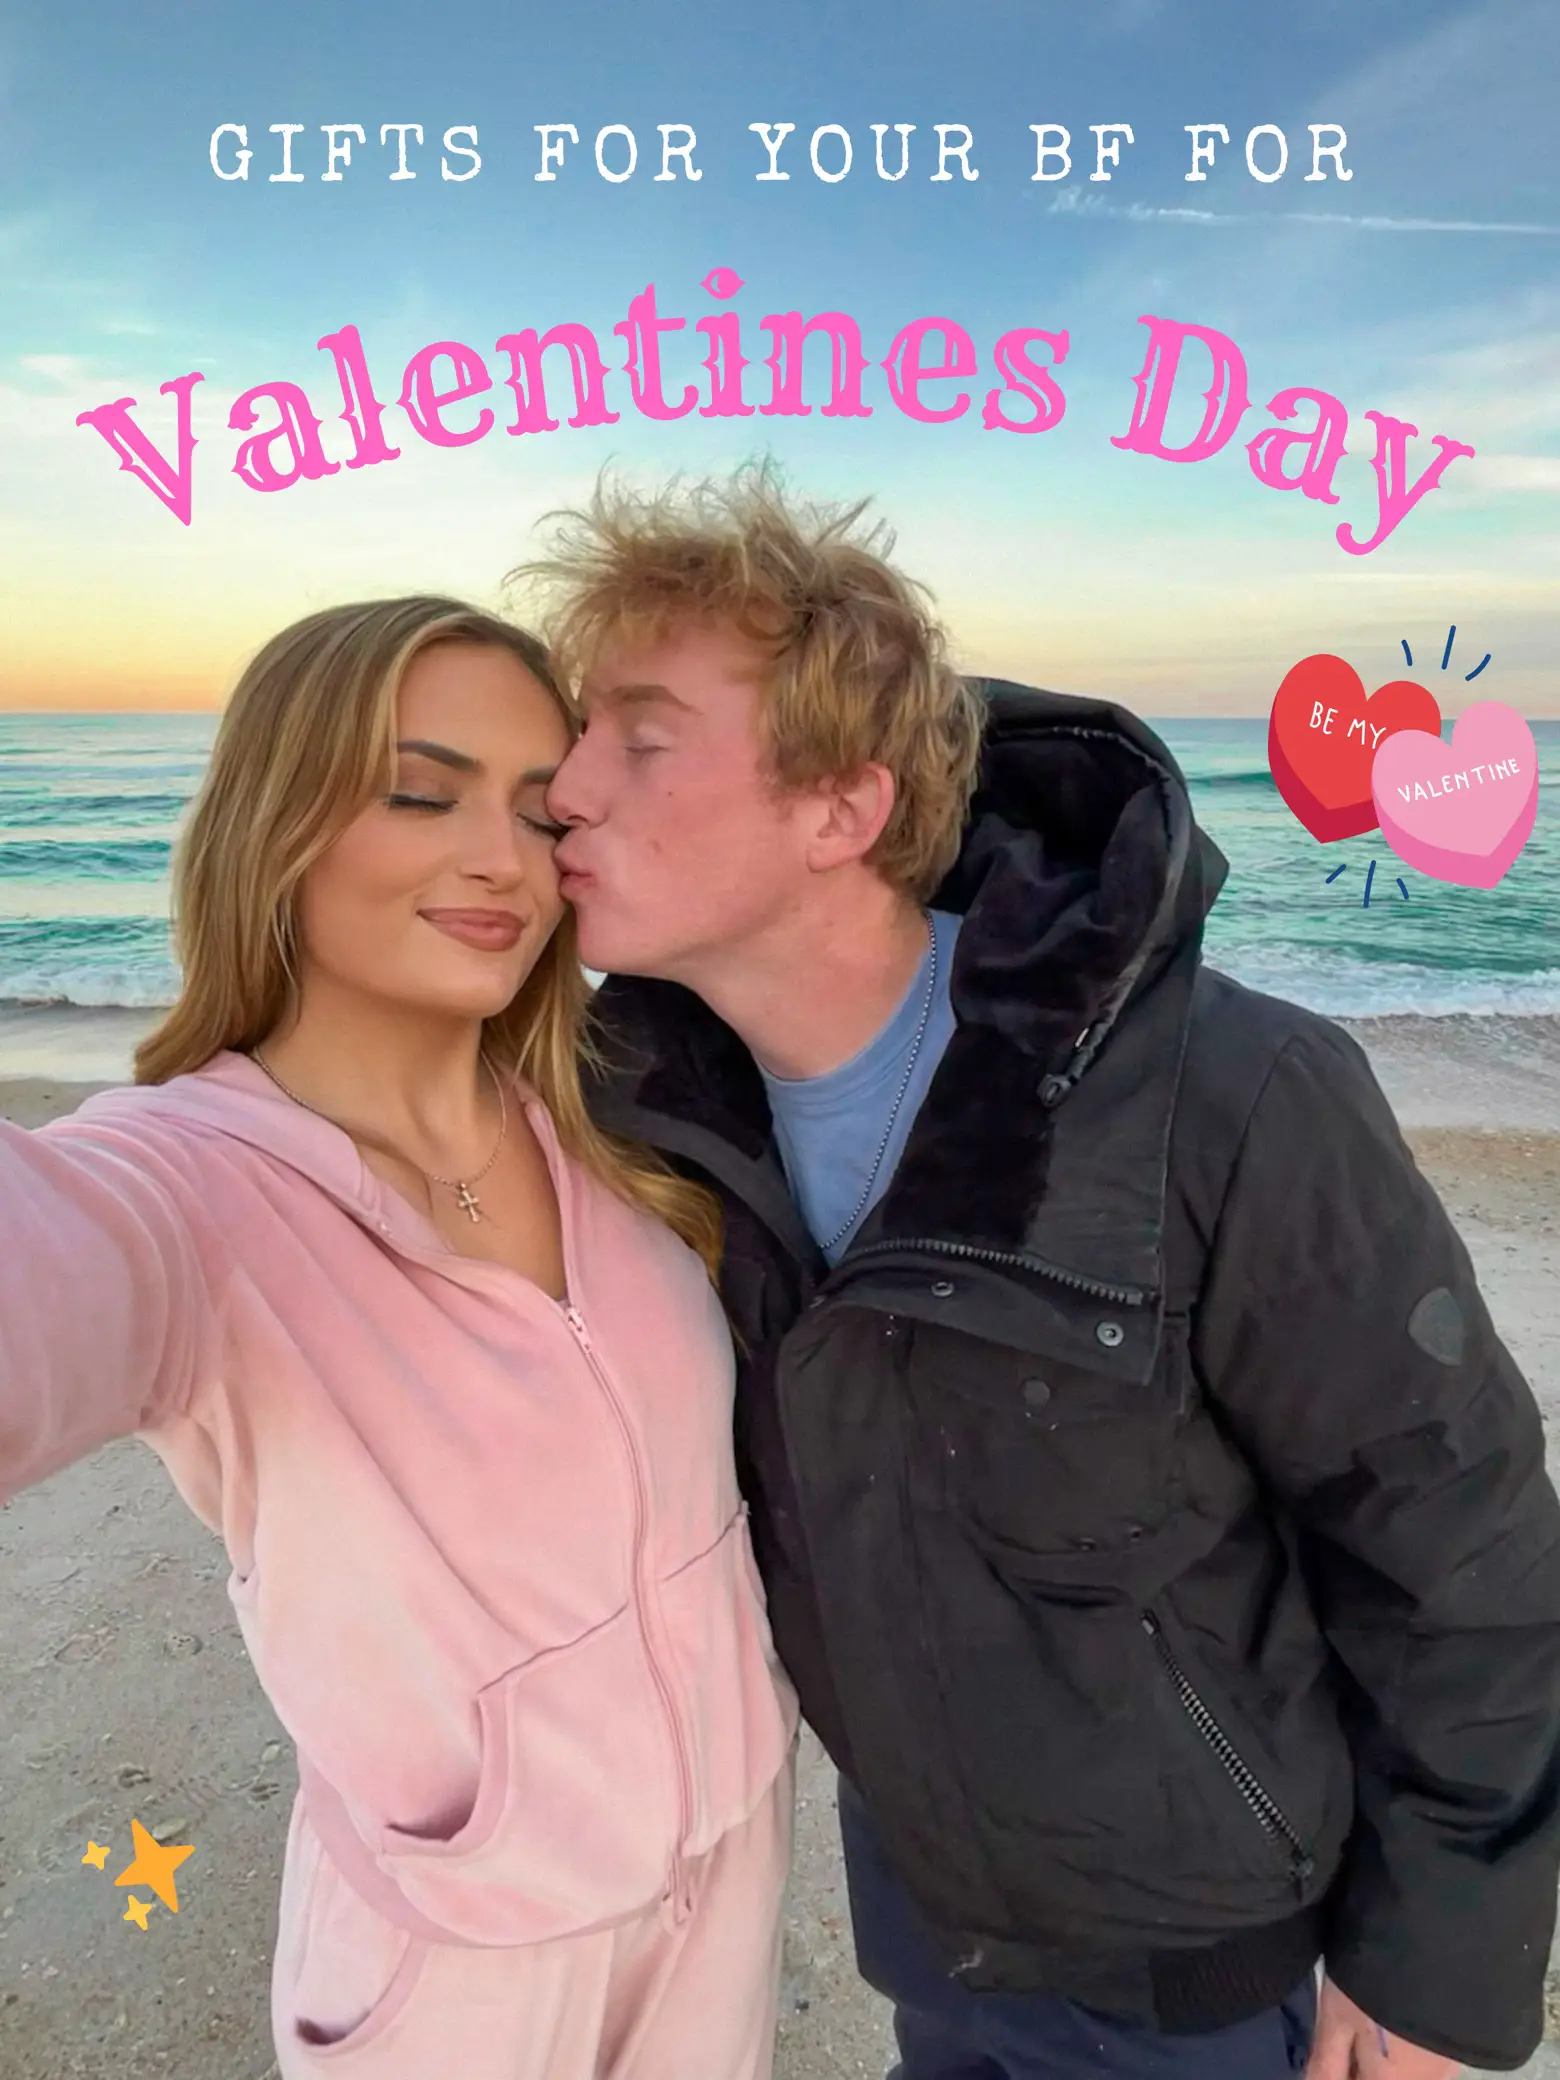 EASY VALENTINE'S DAY PHOTO IDEA 1/14 📸 Here's how to take